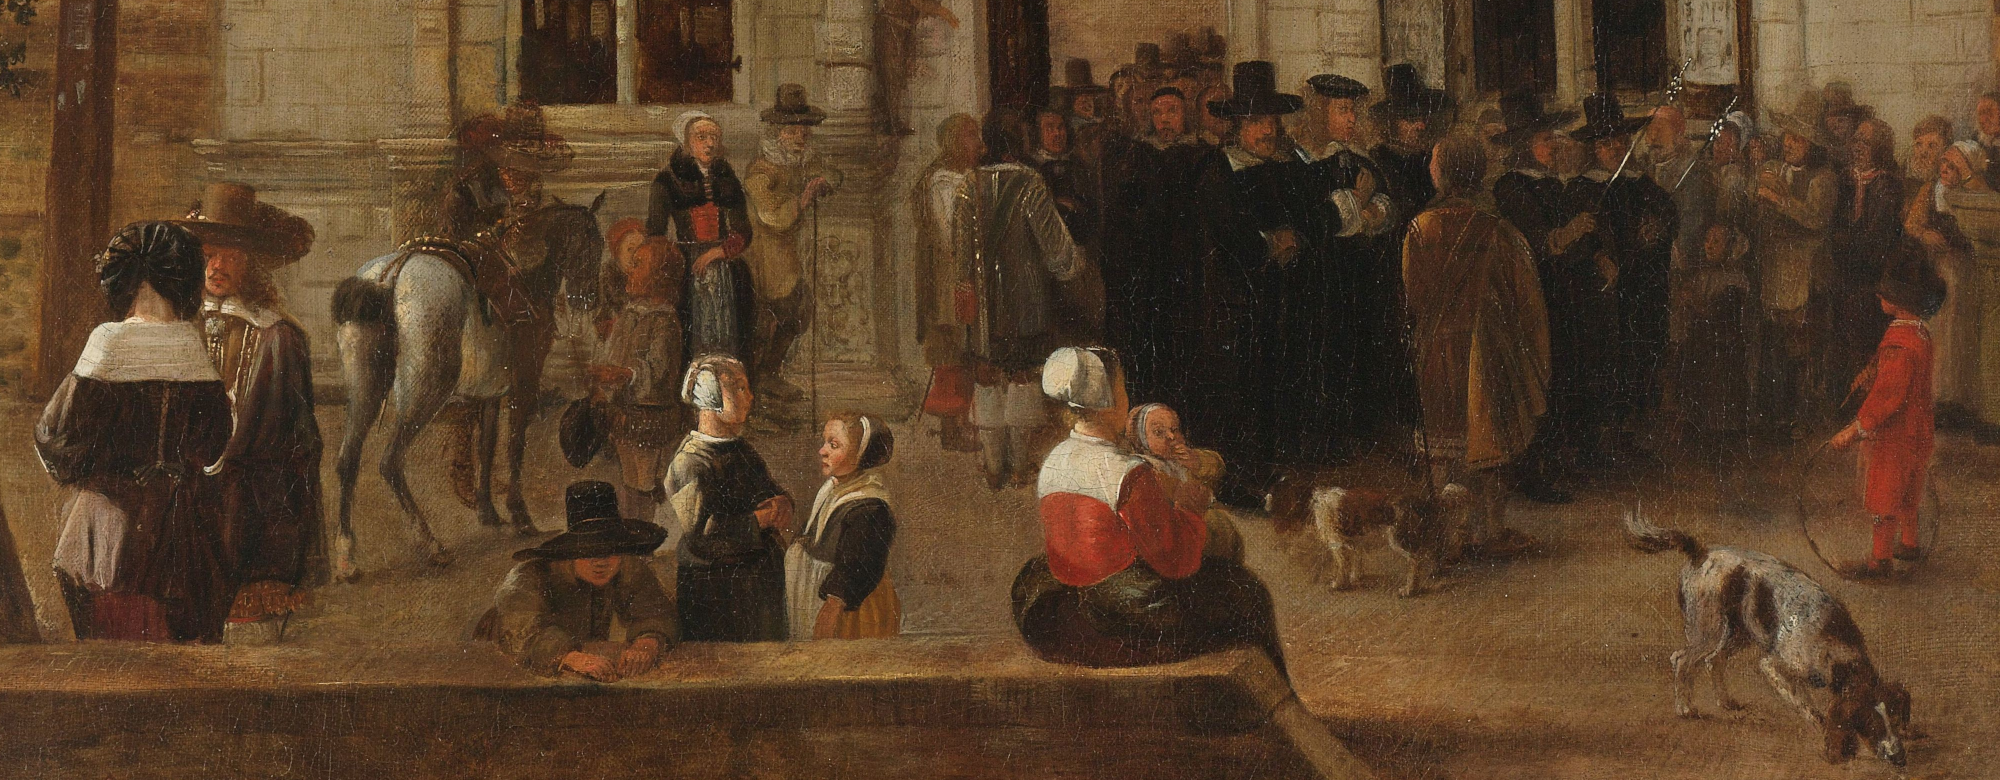 The Conferring of a Degree at the University of Leiden about 1650 by Hendrick van der Burch (cropped)